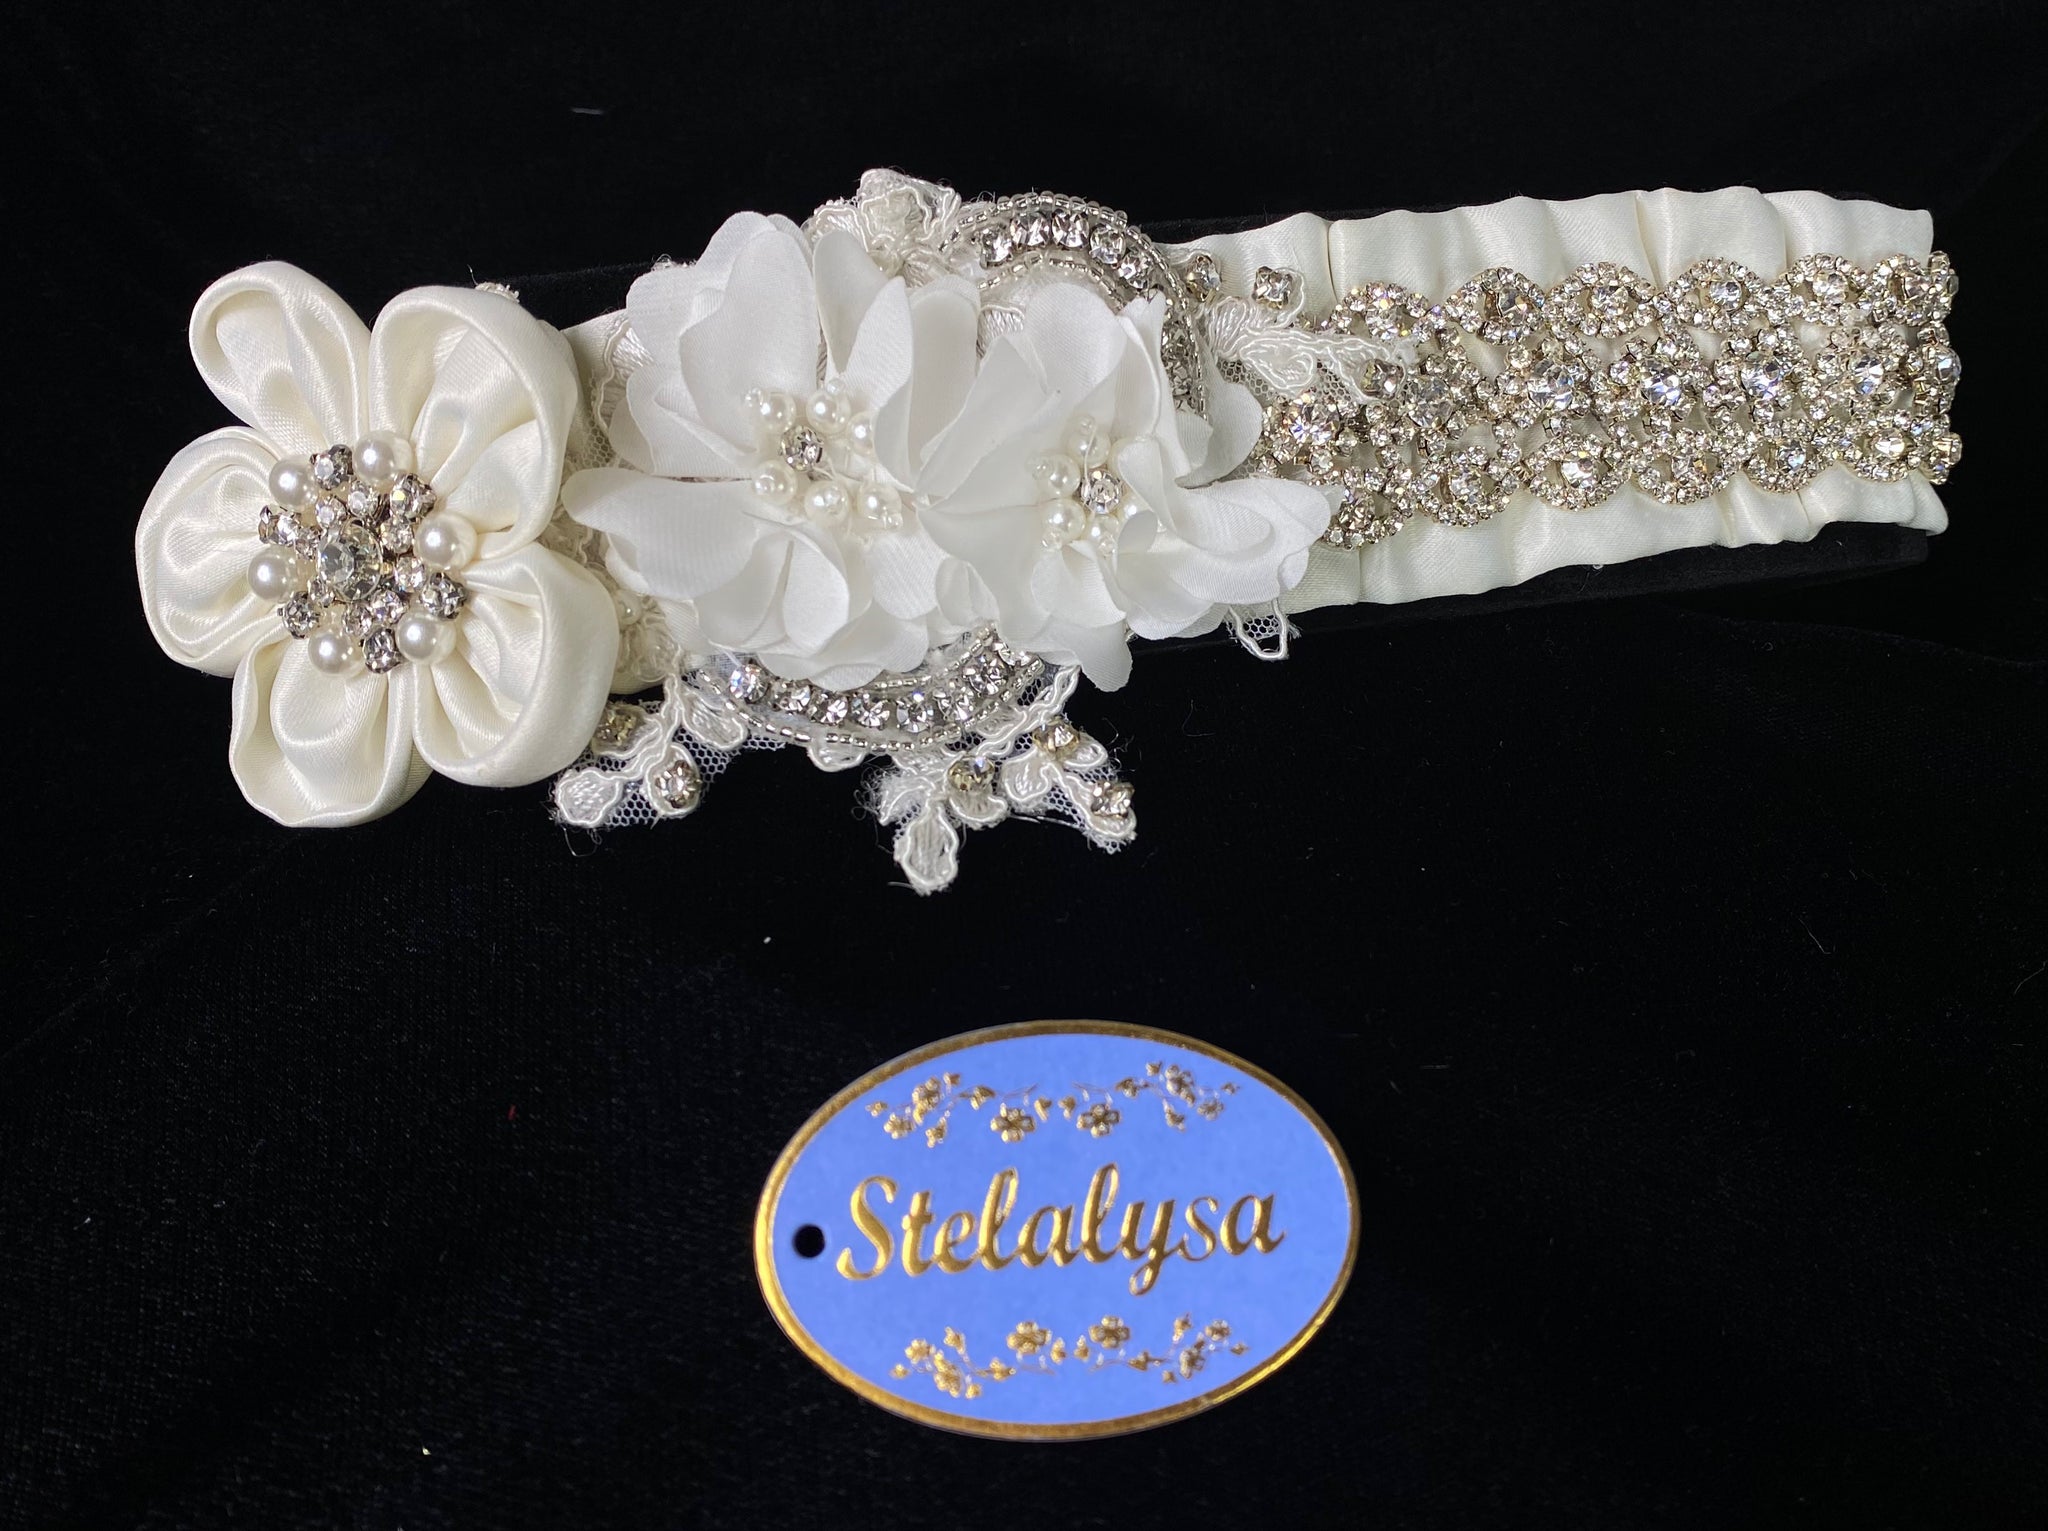 Baptism Headwrap  This is an absolutely gorgeous handmade and one-of-a-kind white and ivory satin headwrap with flowers, rhinestones, pearls, and beads.  Headwrap is elastic wrapped on soft satin material.   Your baby will look like the little princess she is with this headwrap on her special day!  